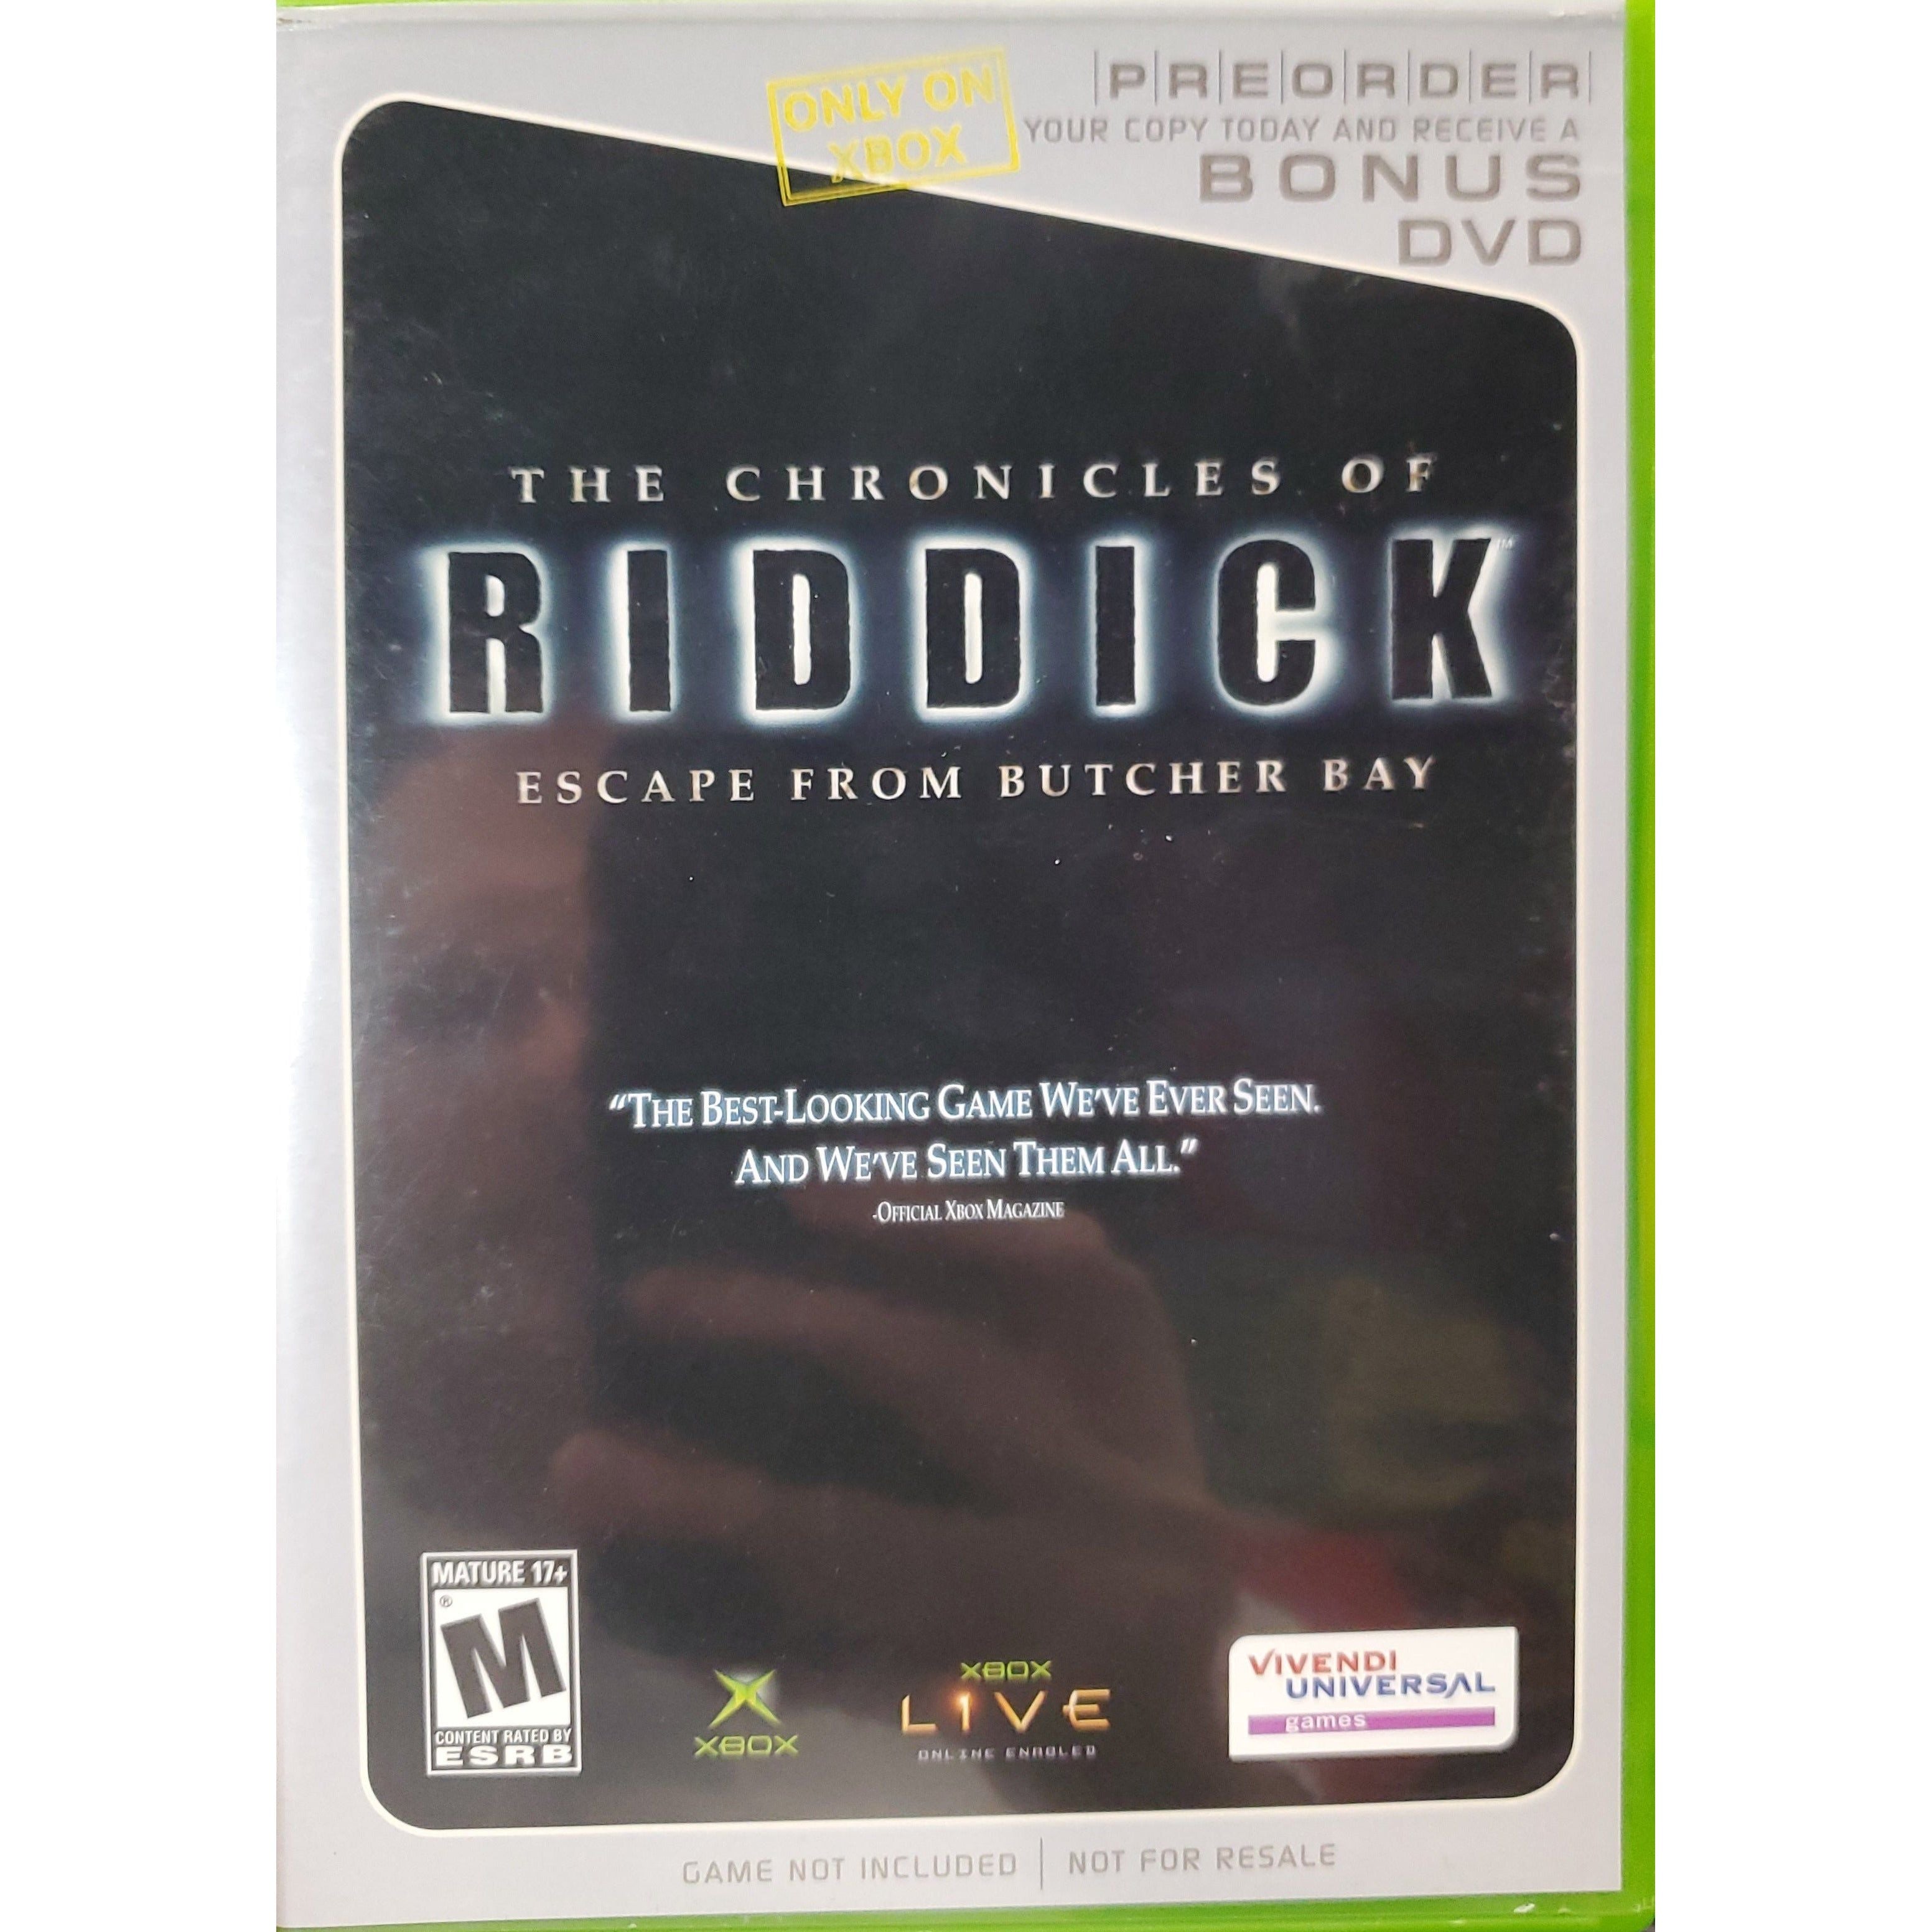 The Chronicles of Riddick Escape from Buther Bay Bonus Preorder DVD